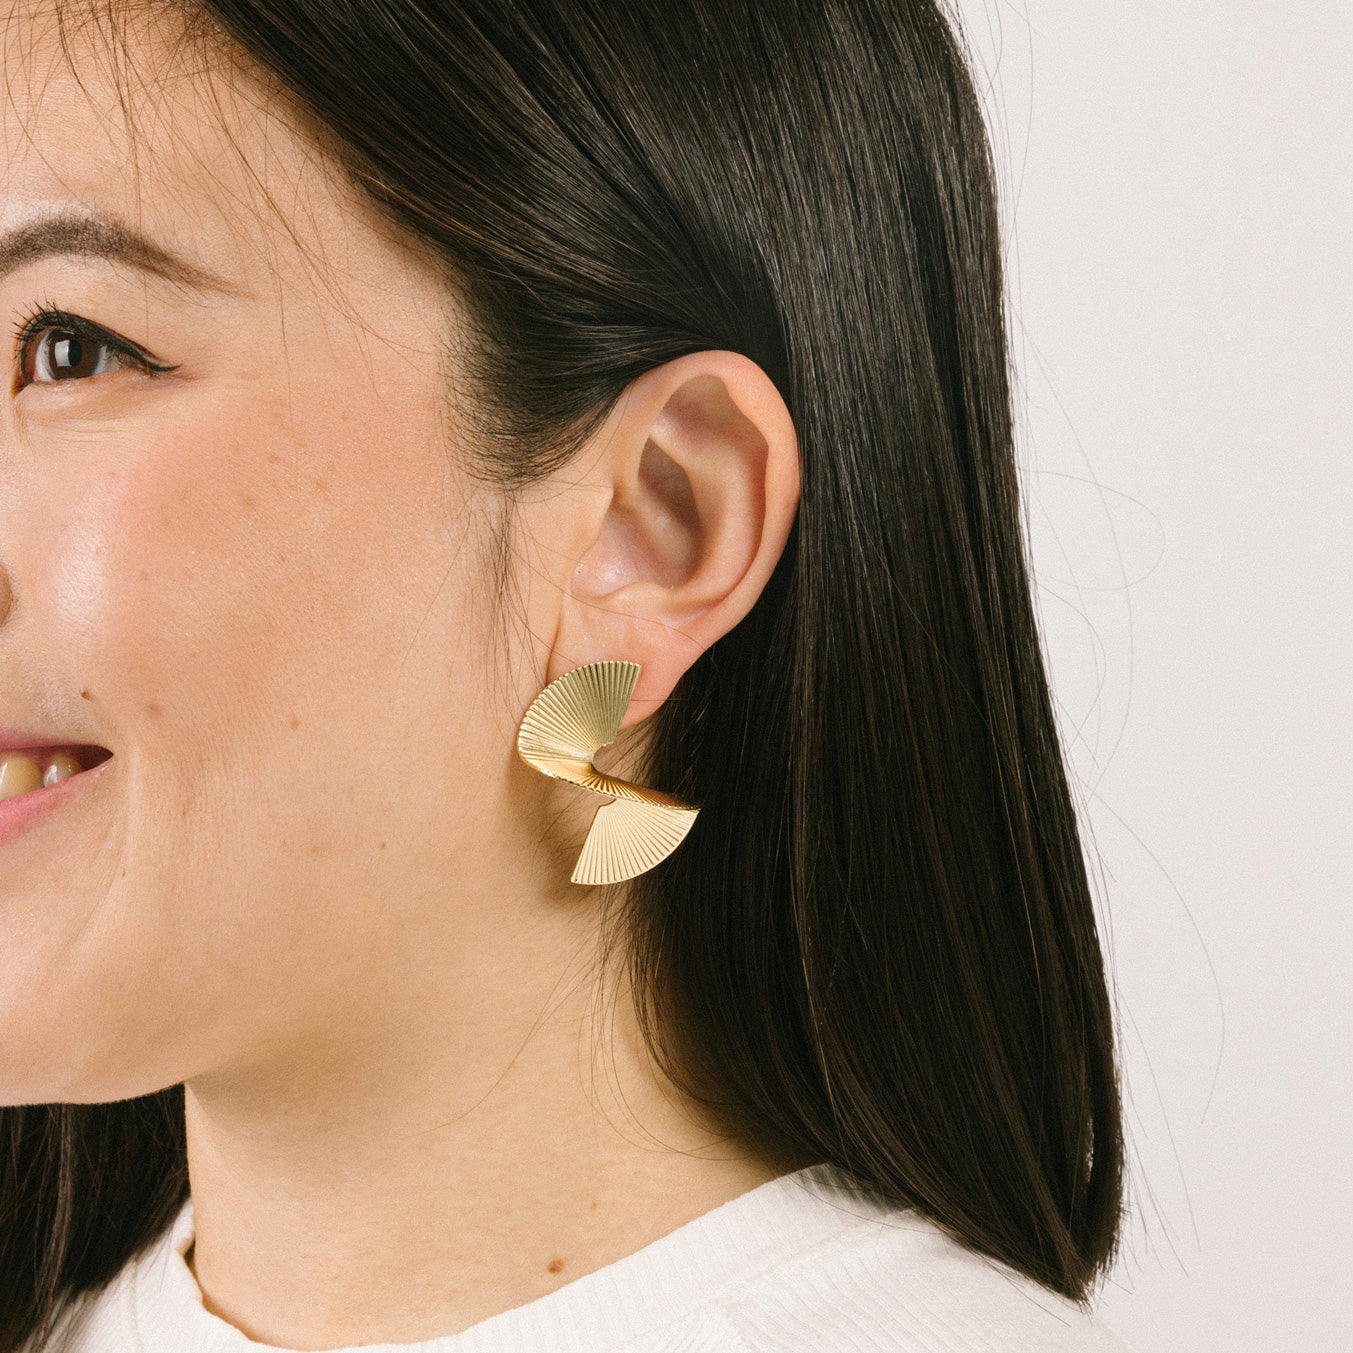 A model wearing the Ribbed Swirl Clip-On Earrings are crafted from a gold-tone copper alloy. These earrings provide a secure hold for up to 12 hours of wear and can comfortably accommodate all ear types, including those with thick or sensitive ears. The clip-on design is complete with removable rubber padding, offering a customized fit with no adjustments necessary. Please note- this item contains one pair.